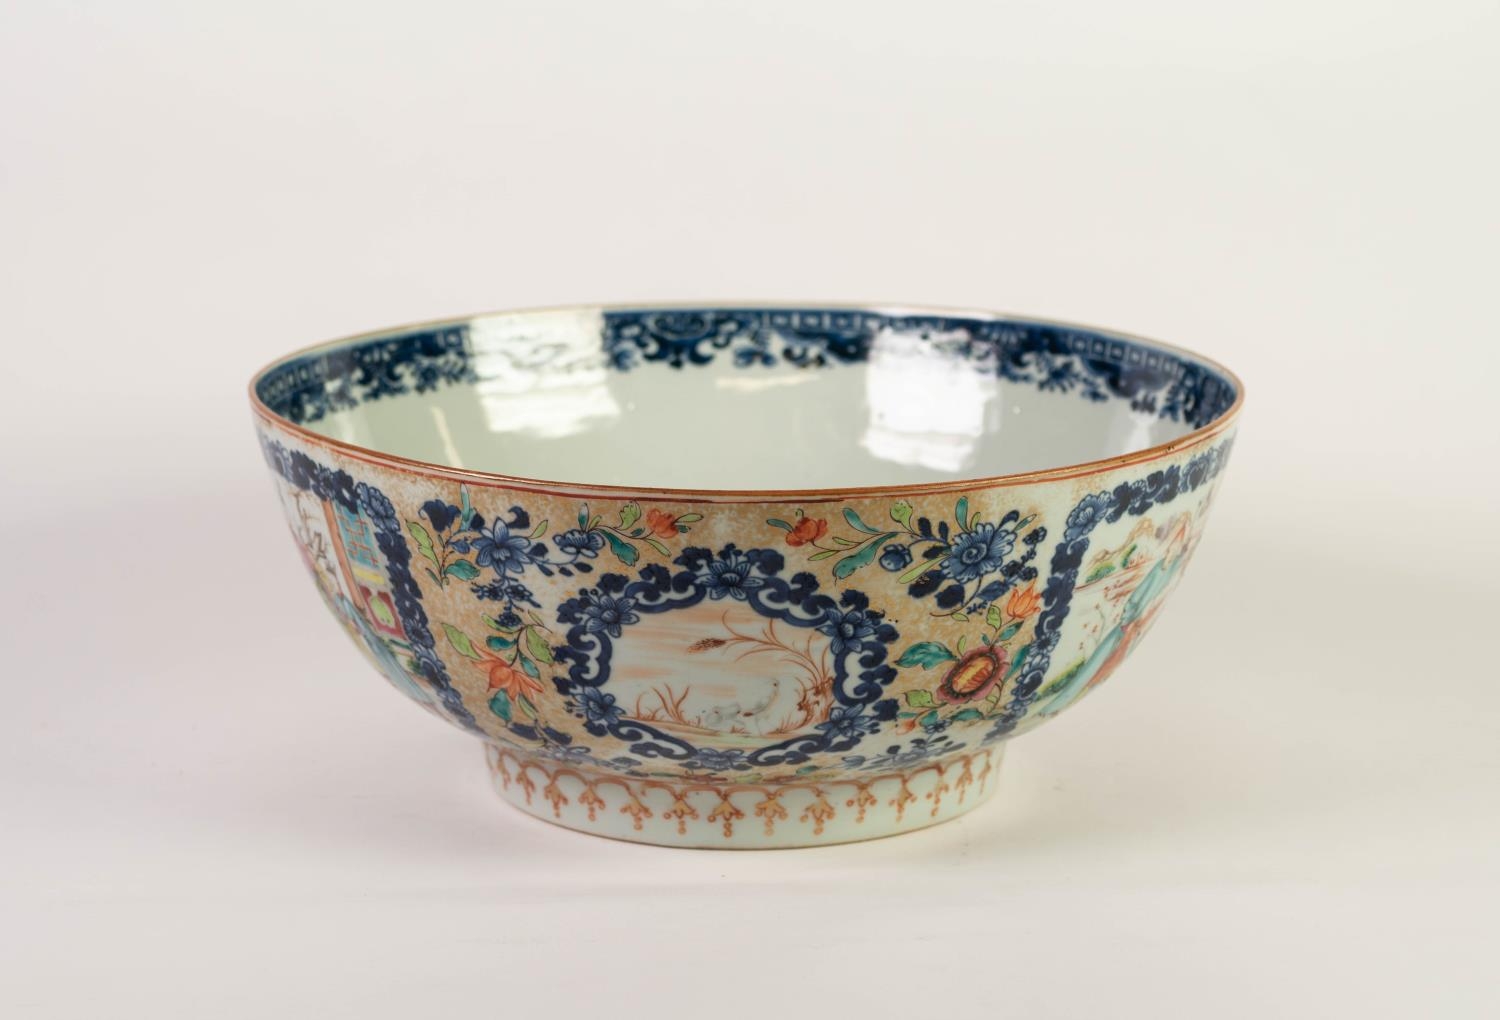 PROBABLY LATE QIANLONG CHINESE EXPORT FAMILLE ROSE PORCELAIN PUNCH BOWL, of typical form, painted in